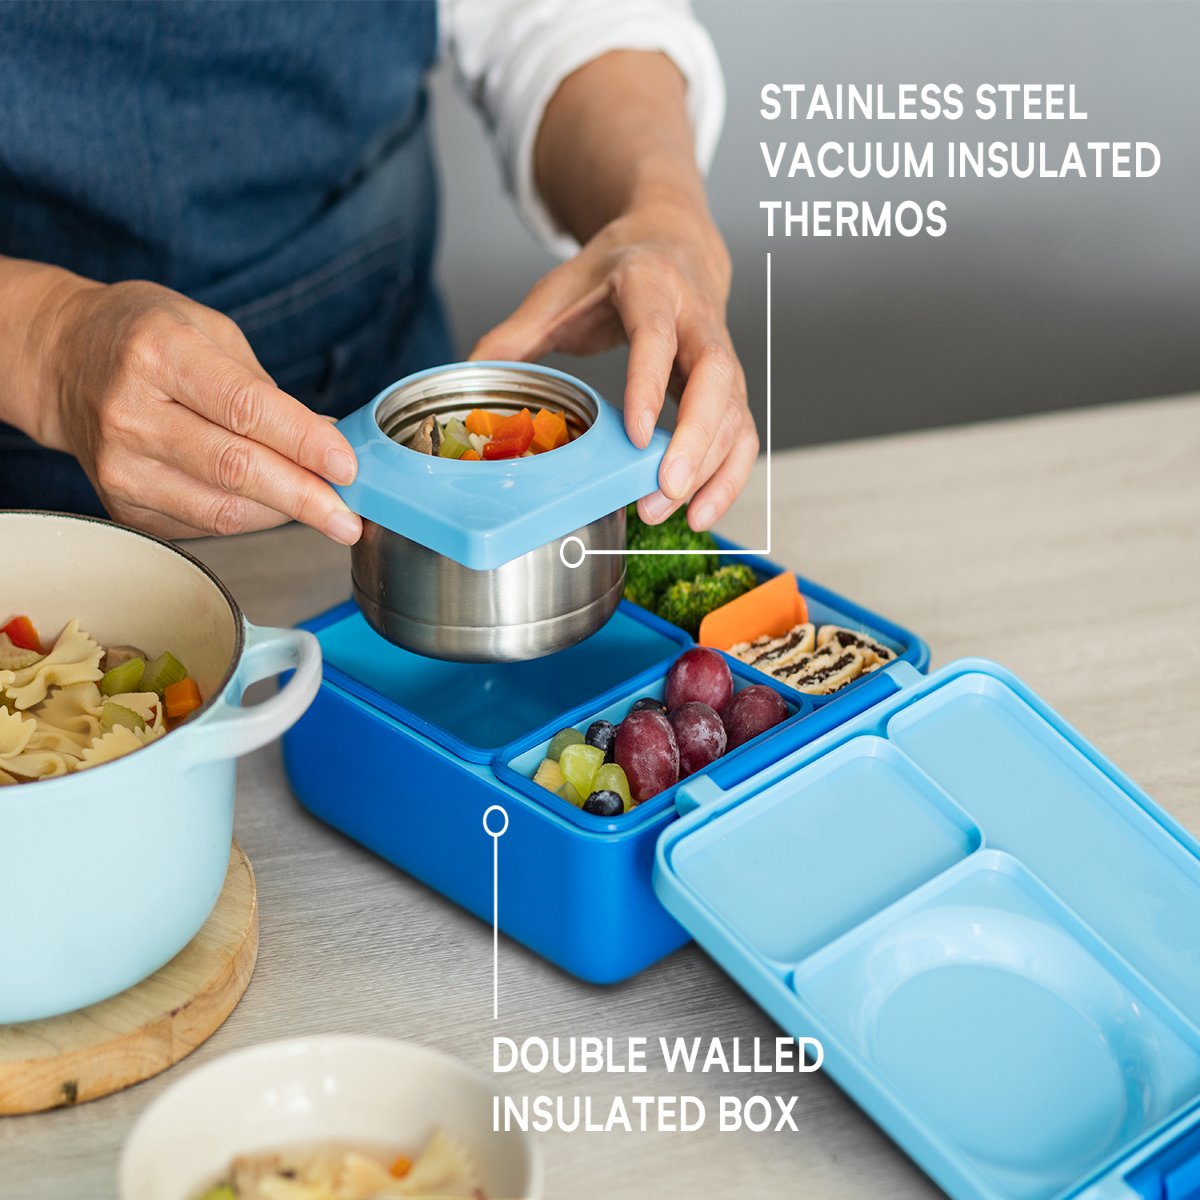 Omiebox | Thermal Hot & Cold Lunchbox V2